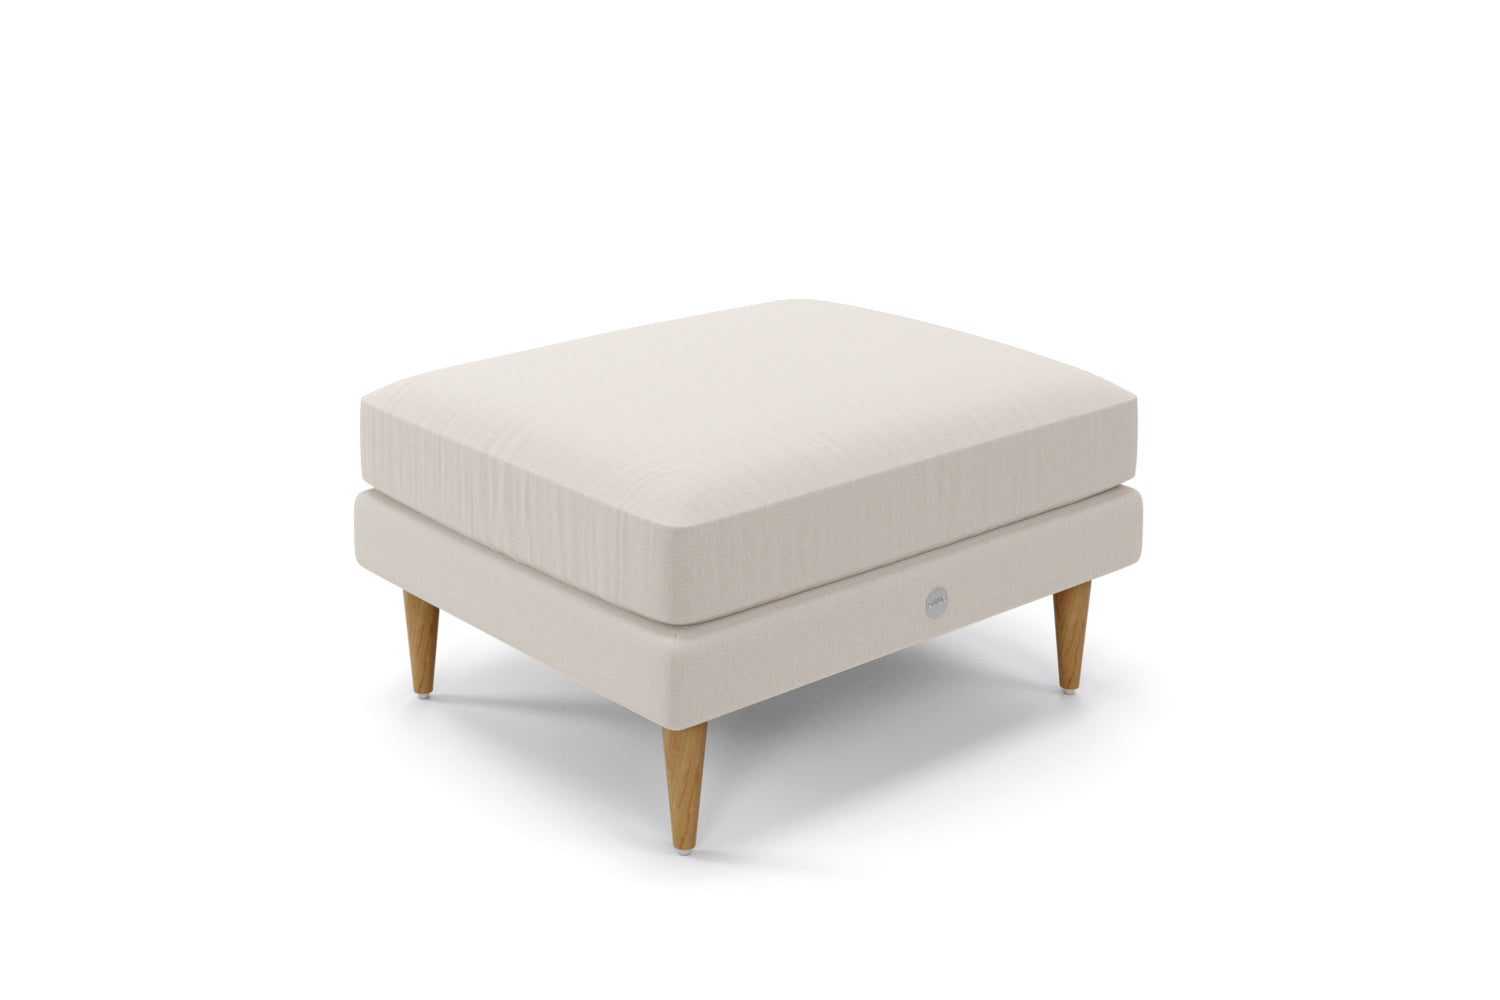 SNUG | The Big Chill Footstool in Biscuit